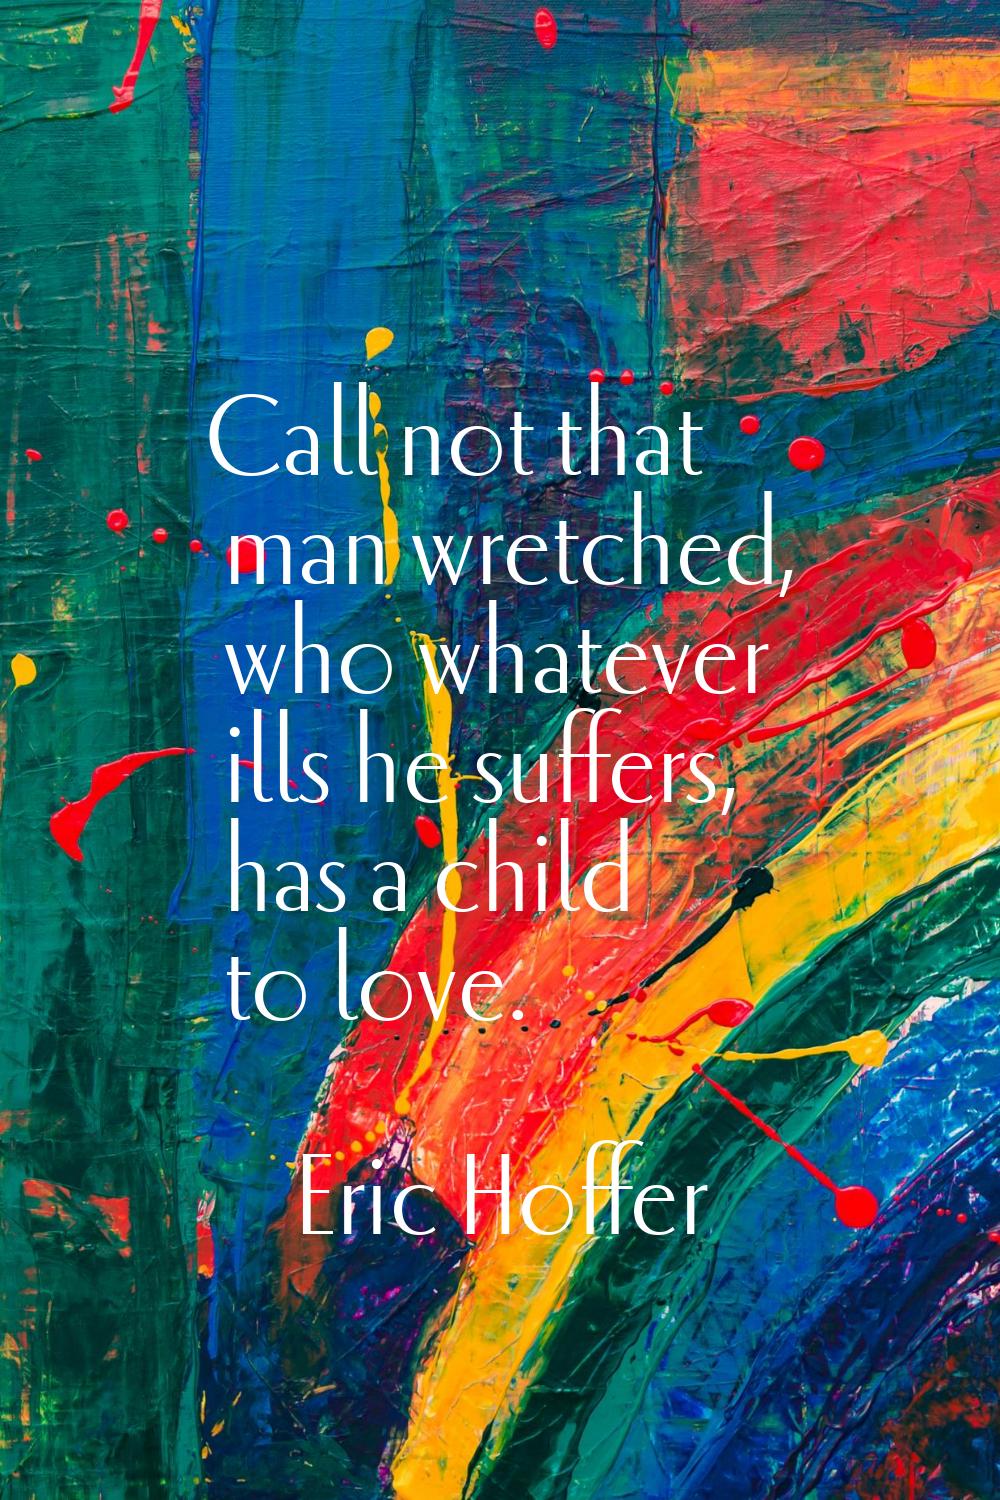 Call not that man wretched, who whatever ills he suffers, has a child to love.